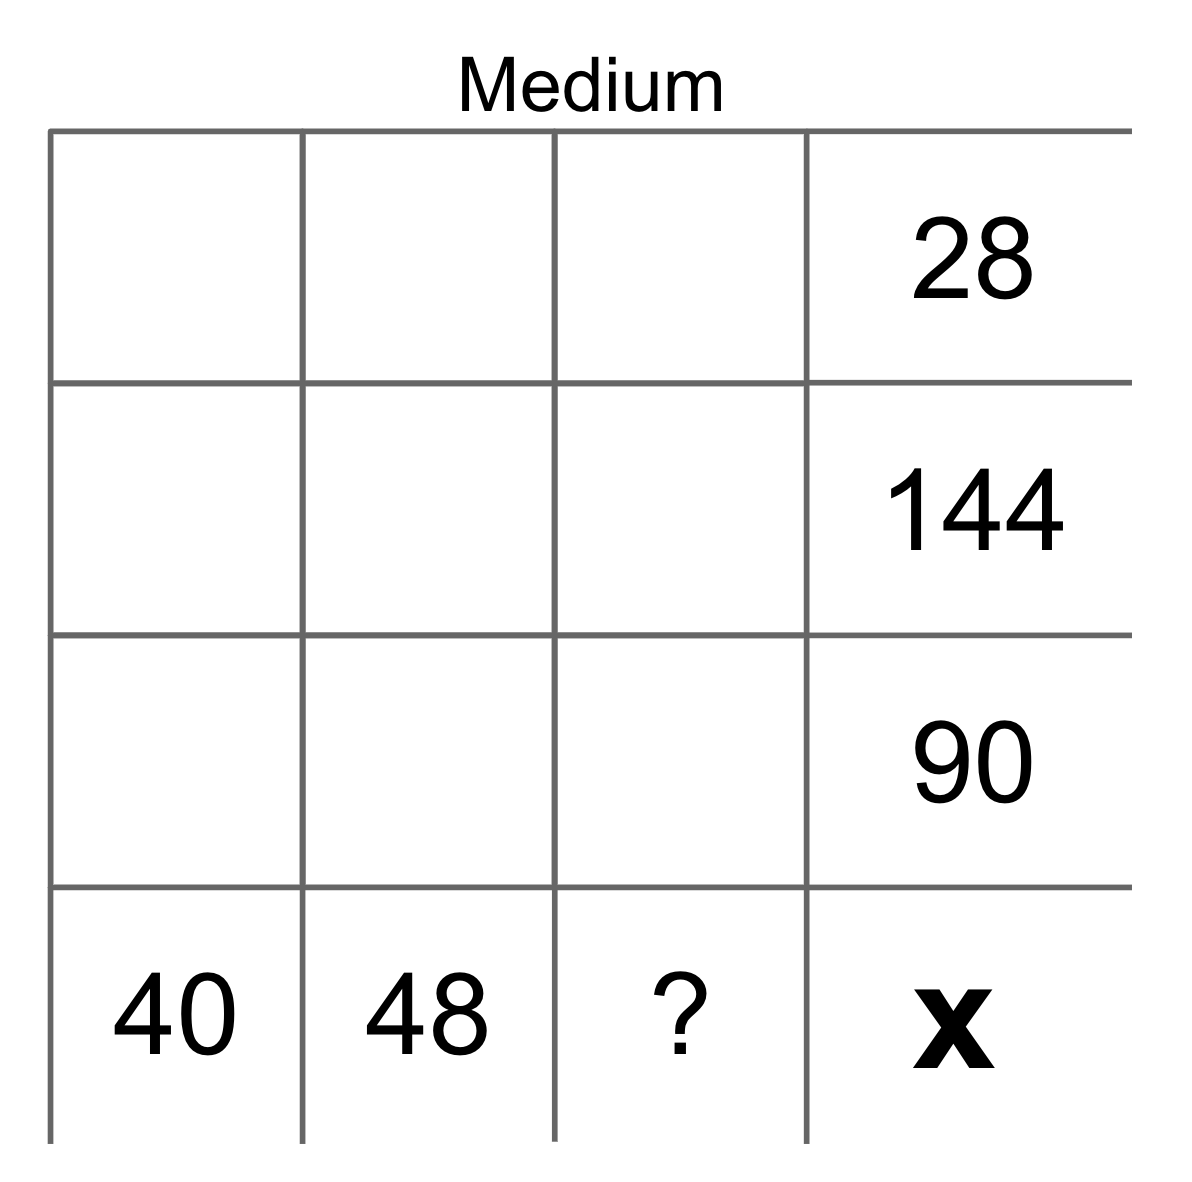 A medium difficulty three-by-three yohaku puzzle where numbers need to multiply down to the products 40, 48, and a missing number (at the bottom), as well as across to the products 28, 144, and 90 (down the right side.)